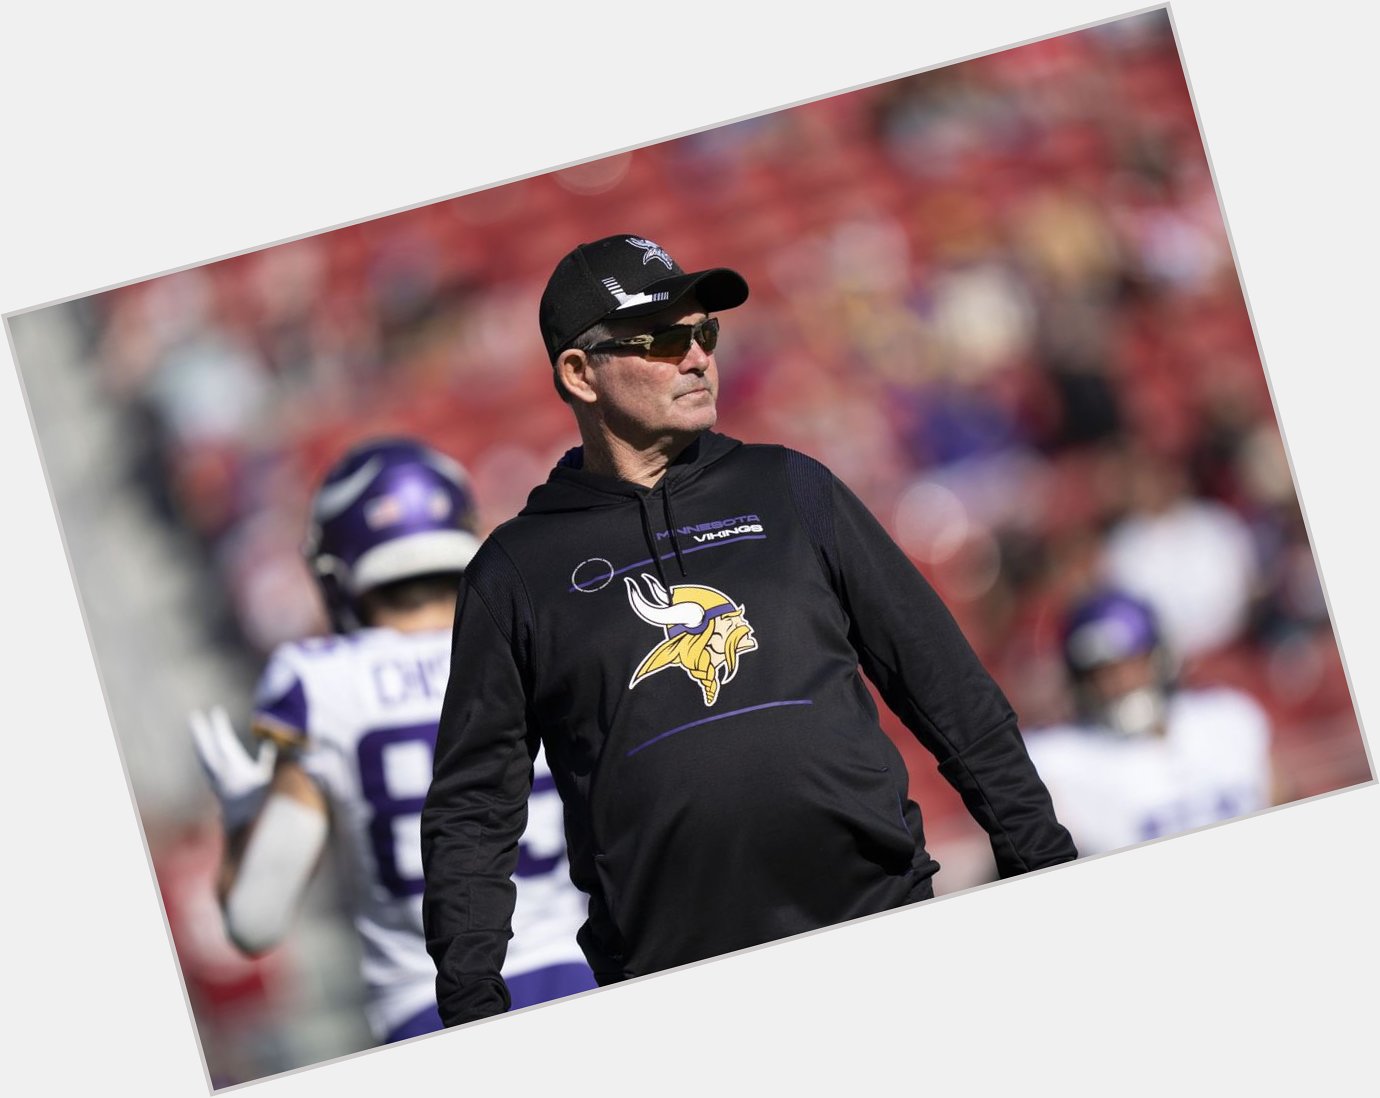 Happy birthday to the king of all kings and my coach forever, Mike Zimmer. 